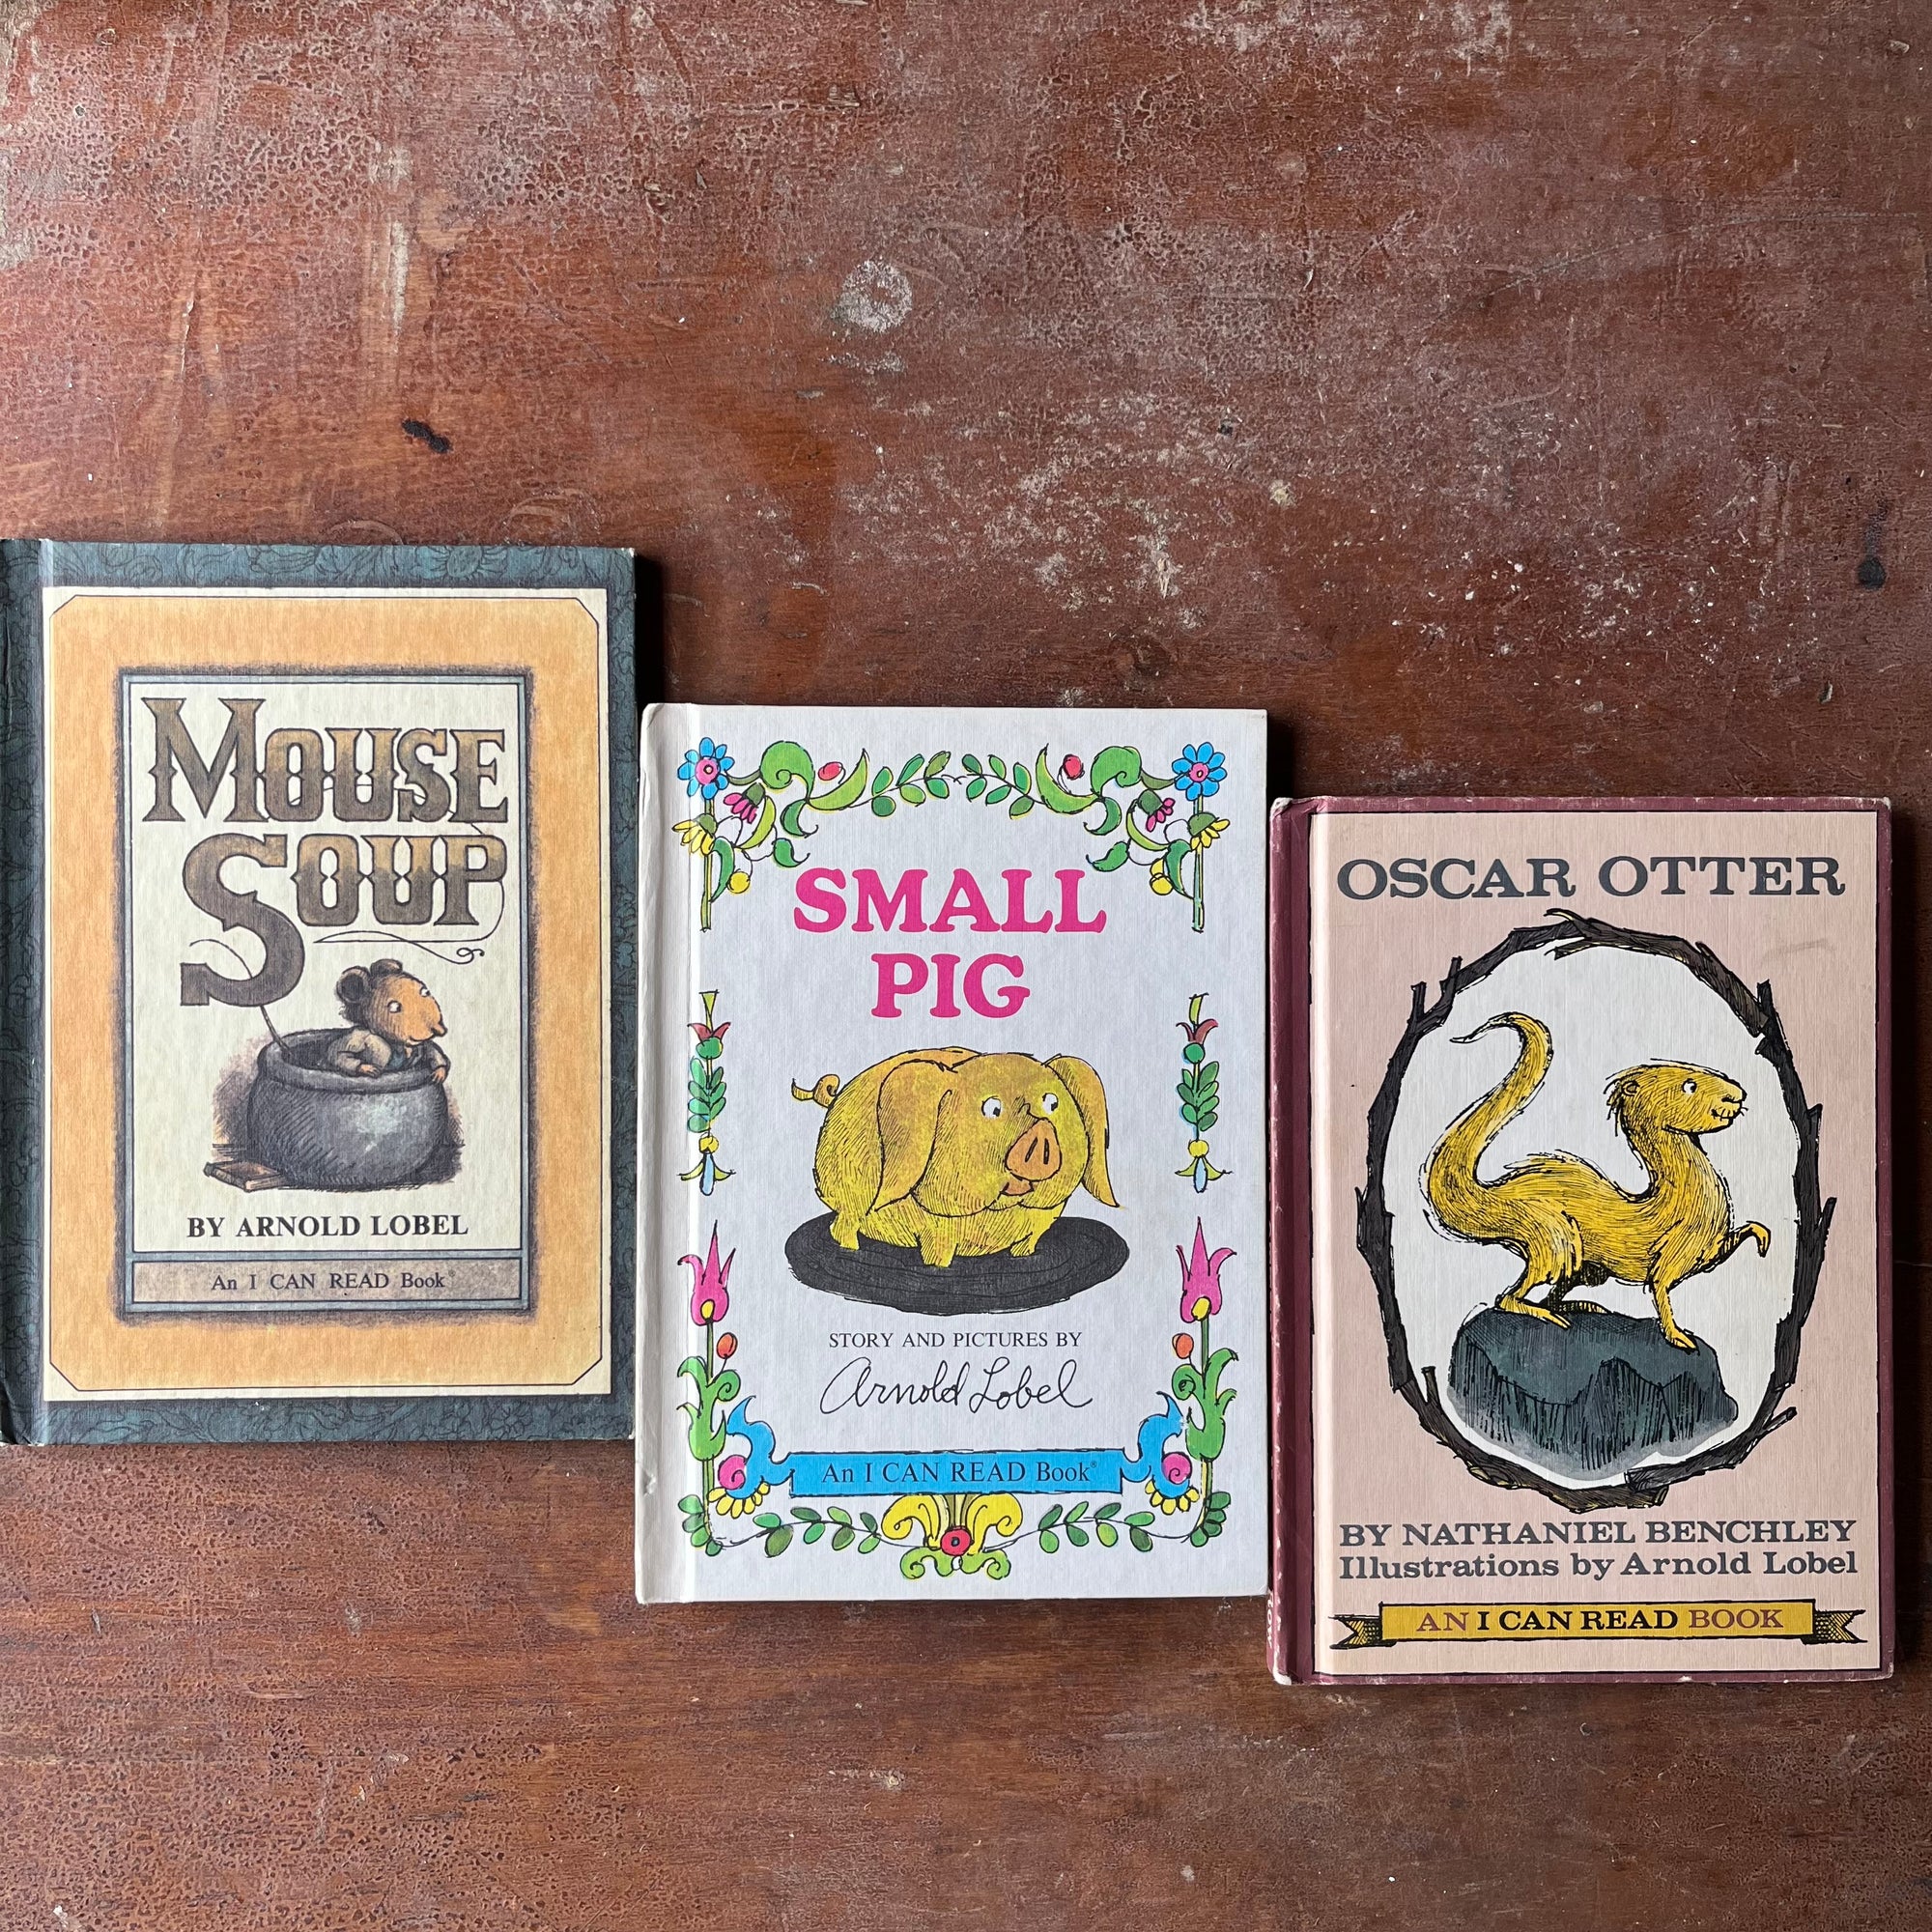 Log Cabin Vintage - vintage children's books, picture books, An I Can Read Book - Set of Three Books Written and Illustrated by Arnold Lobel:  Mouse Soup, Small Pig and Oscar Otter - view of their front covers